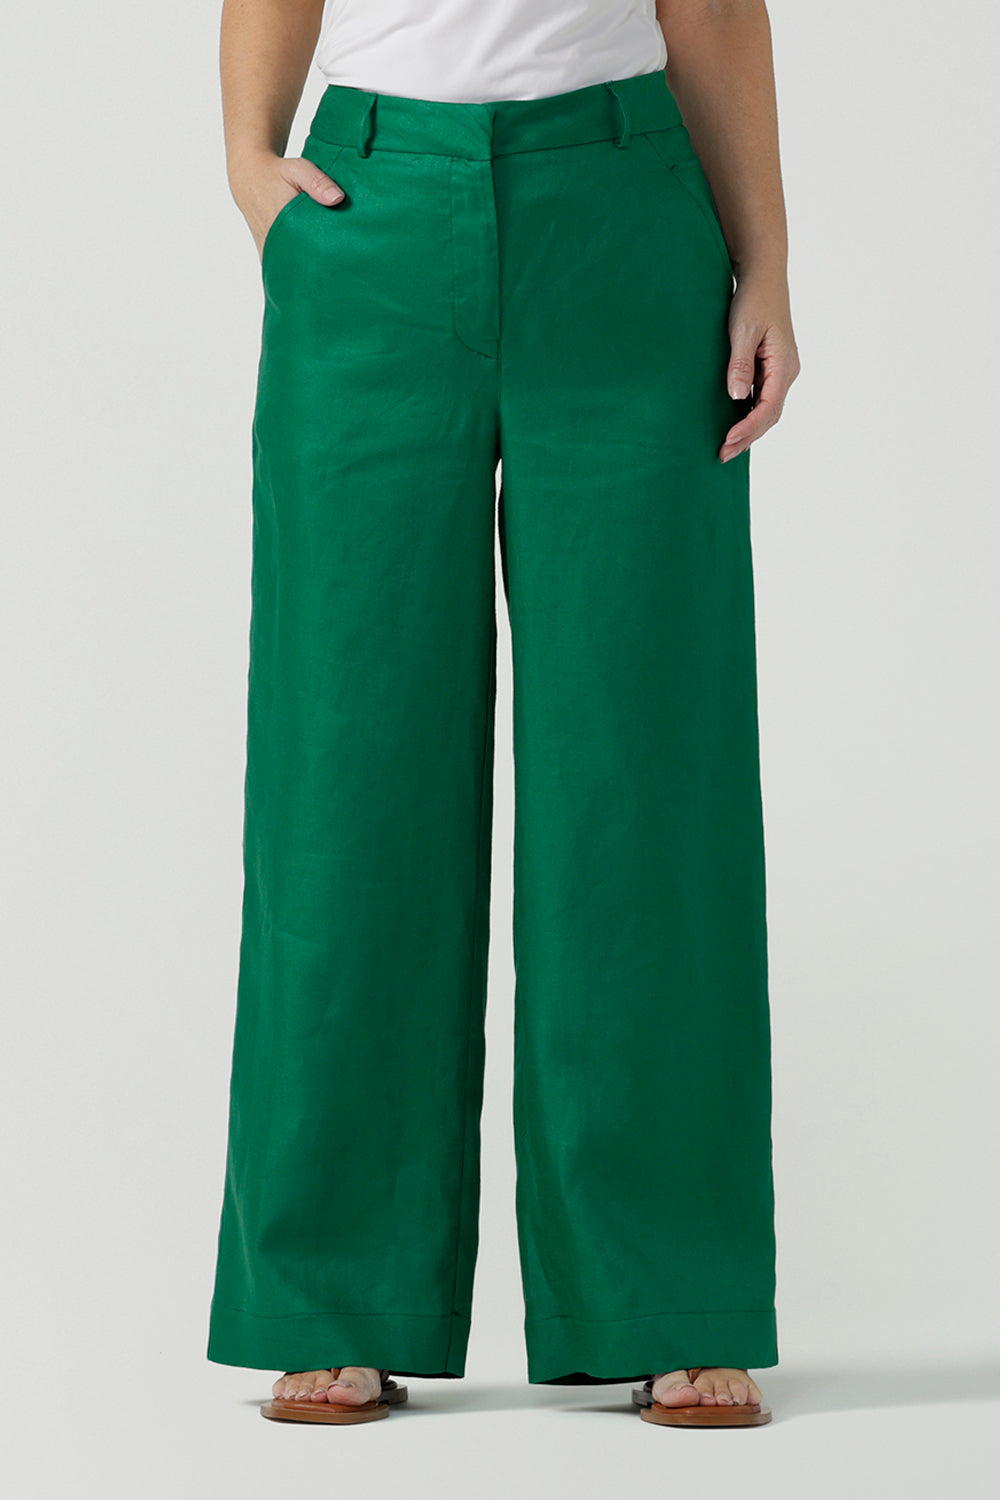 A size 12 woman wears a tailored linen pant in 100% linen. Breathable linen fabrication in a beautiful emerald green colour. The perfect workwear pants with pockets that make great summer pants. Size inclusive fashion designed and made in Australia size 8 - 24. 